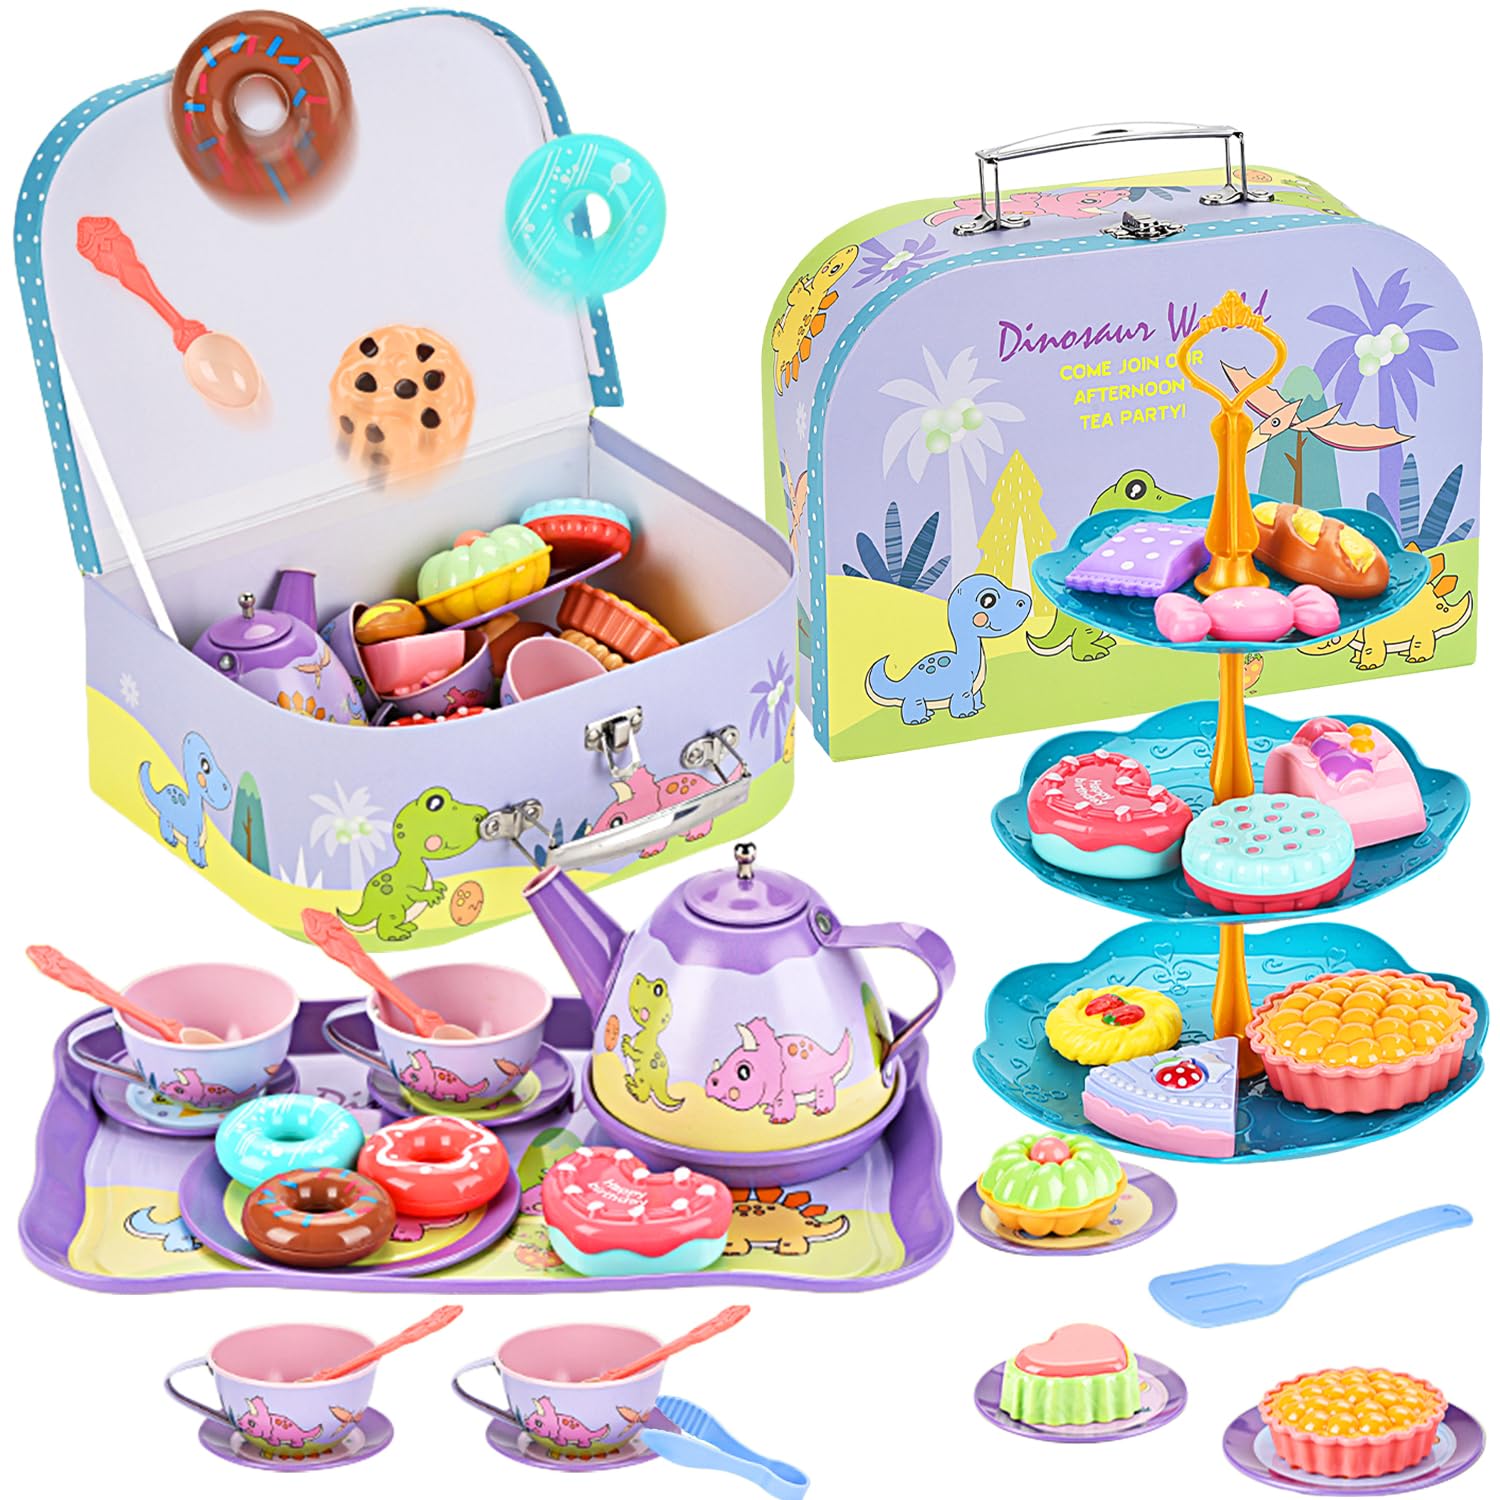 Yosamy 45Pcs Tea Party Set for Little Girls Princess Tea Time Toy Playset Ocean/Dinosaur Theme Kids Tea Set with Desserts & Carrying Case Kitchen Pretend Toy for Kids Toddlers Age 3 4 5 6 (Dinosaur)